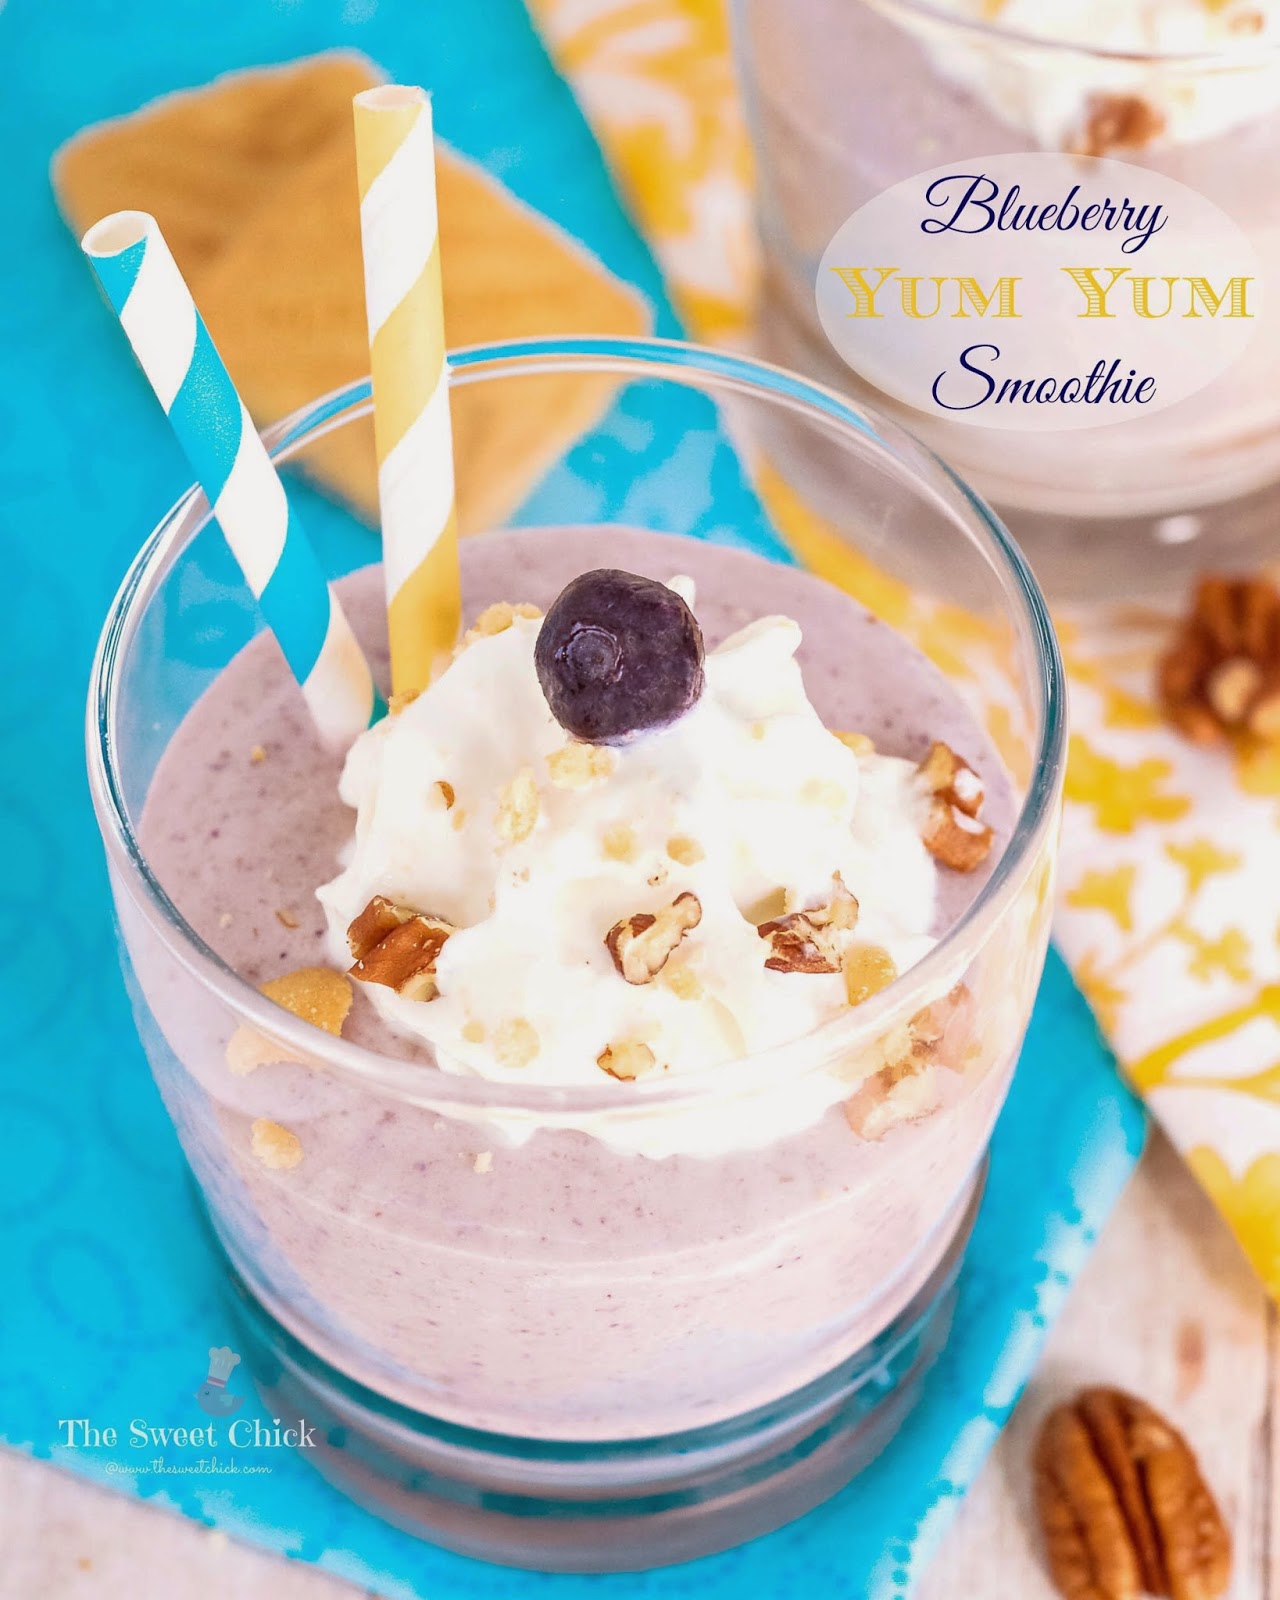 Blueberry Yum Yum Smoothie by The Sweet Chick